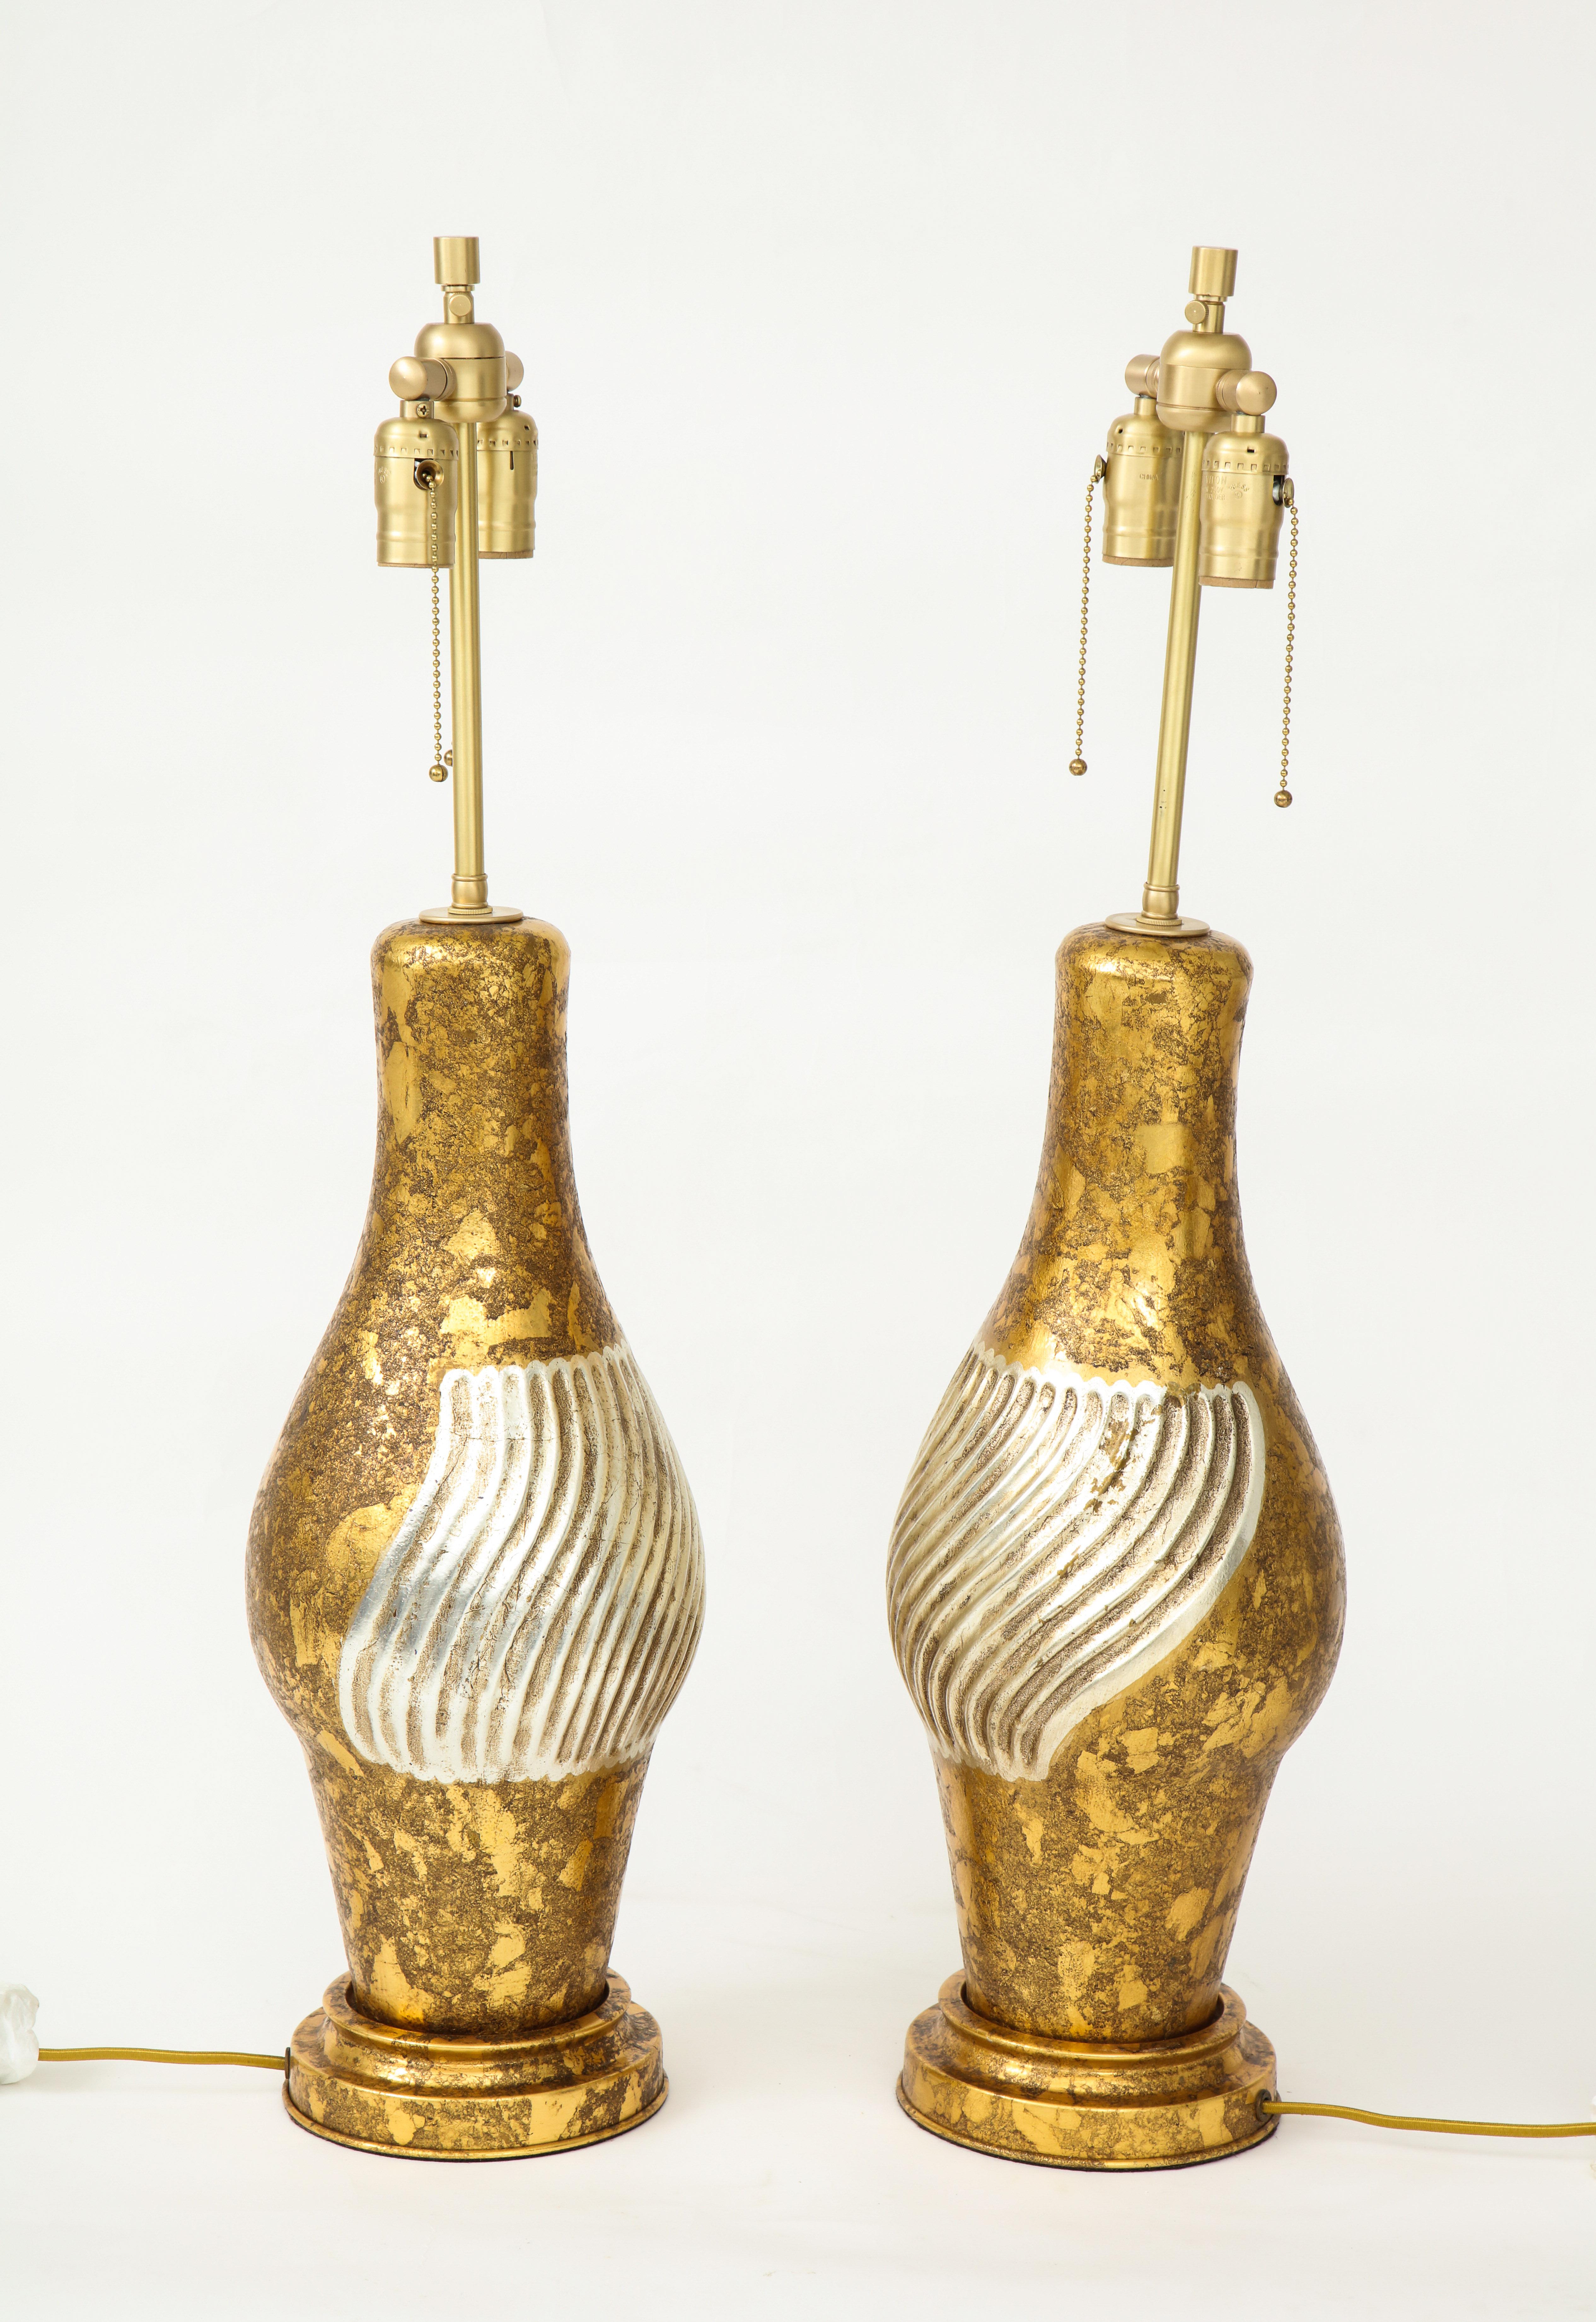 Pair of large scale, James Mont influenced, gilded porcelain lamps with silvered section. Lamps have been rewired for use in the USA with brass pull chain sockets. 75W max each unless using LED bulbs.